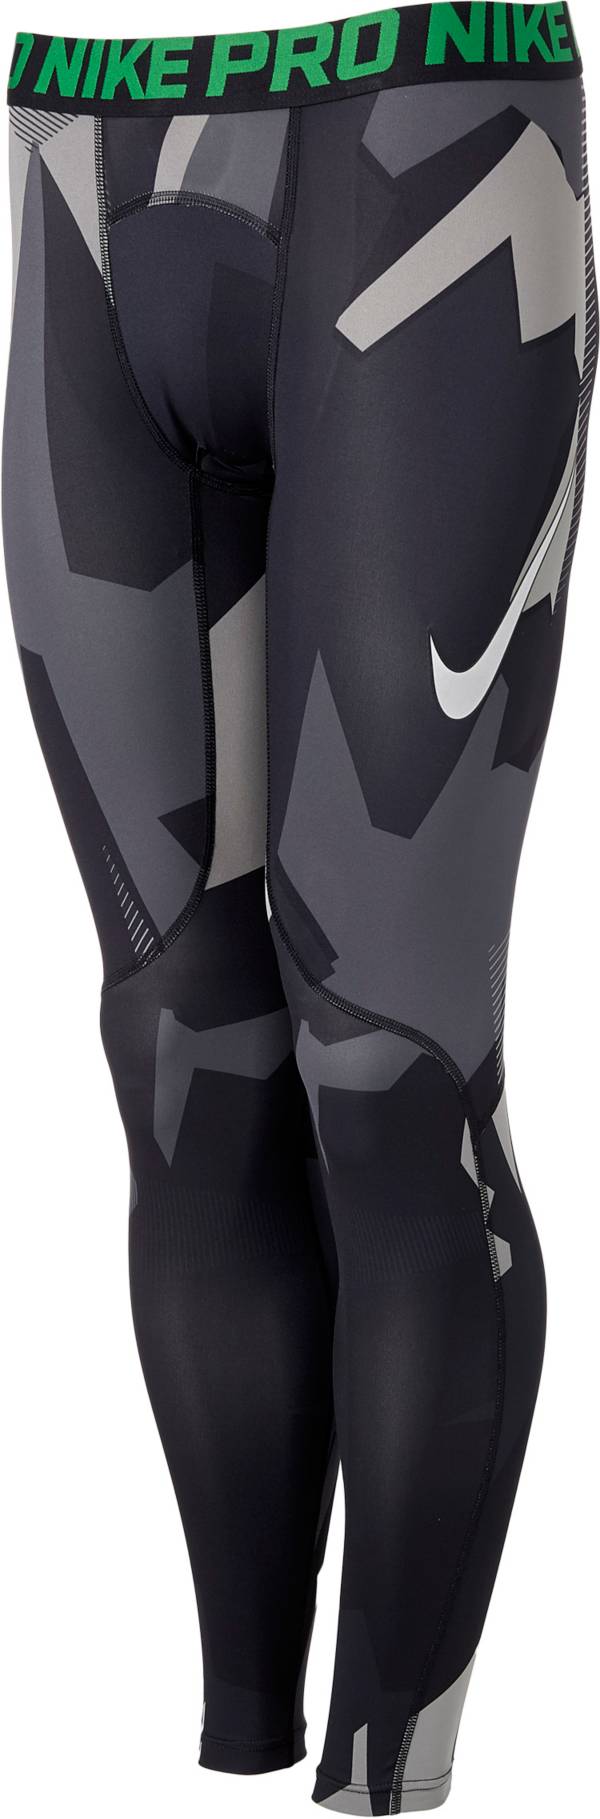 Nike Pro Cool Men's Camo Football Tights product image